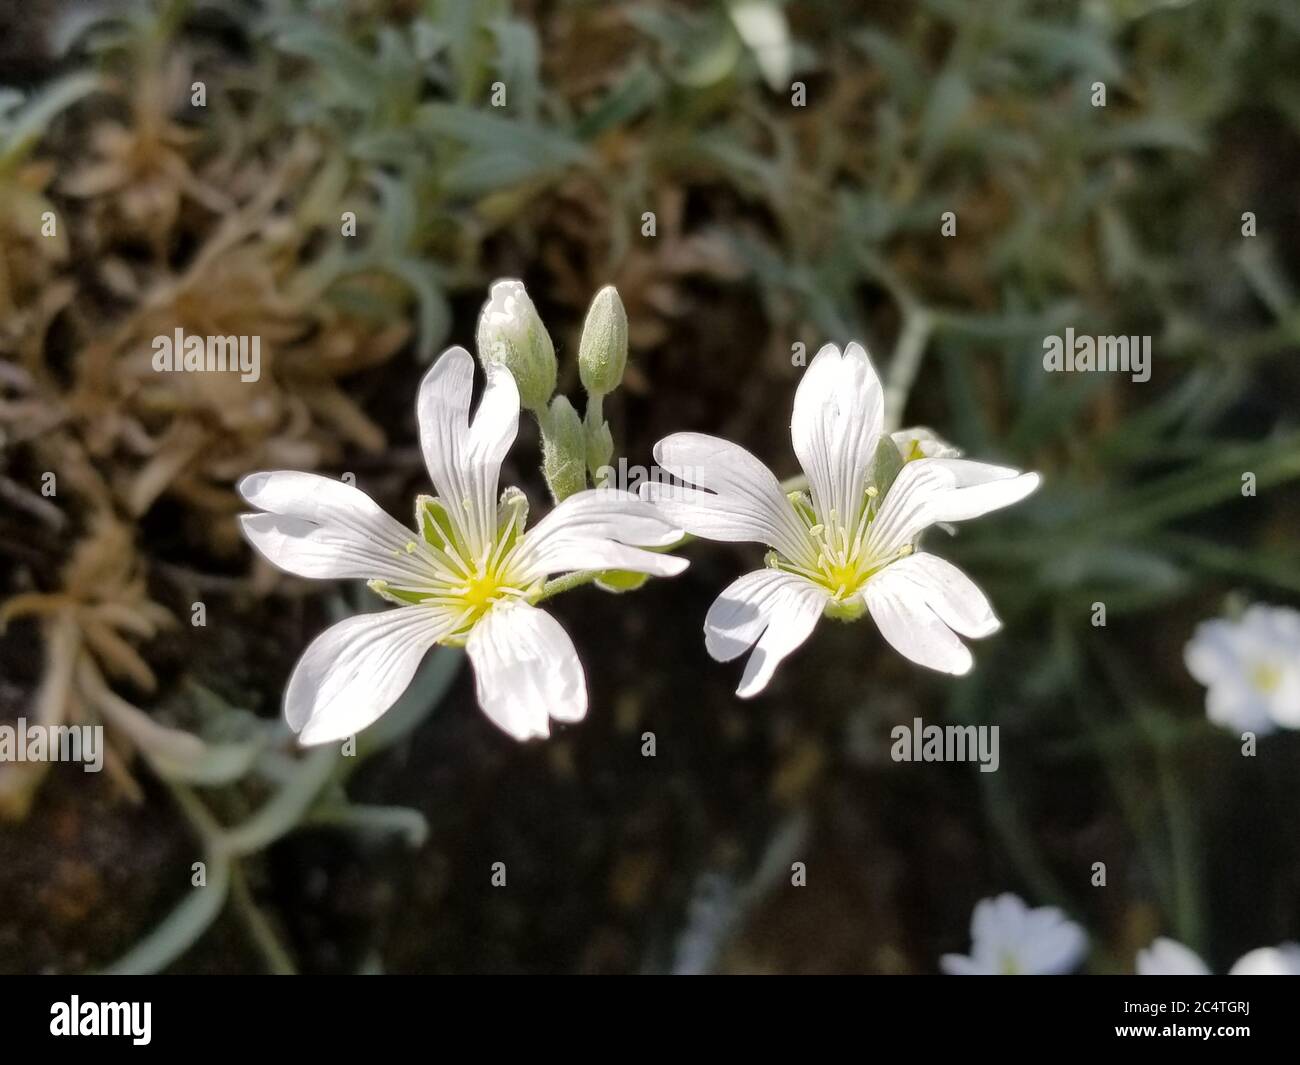 White Cerastium, also known as mouse-ear chickweed, flowers and buds, on a blurred background of green leaves Stock Photo